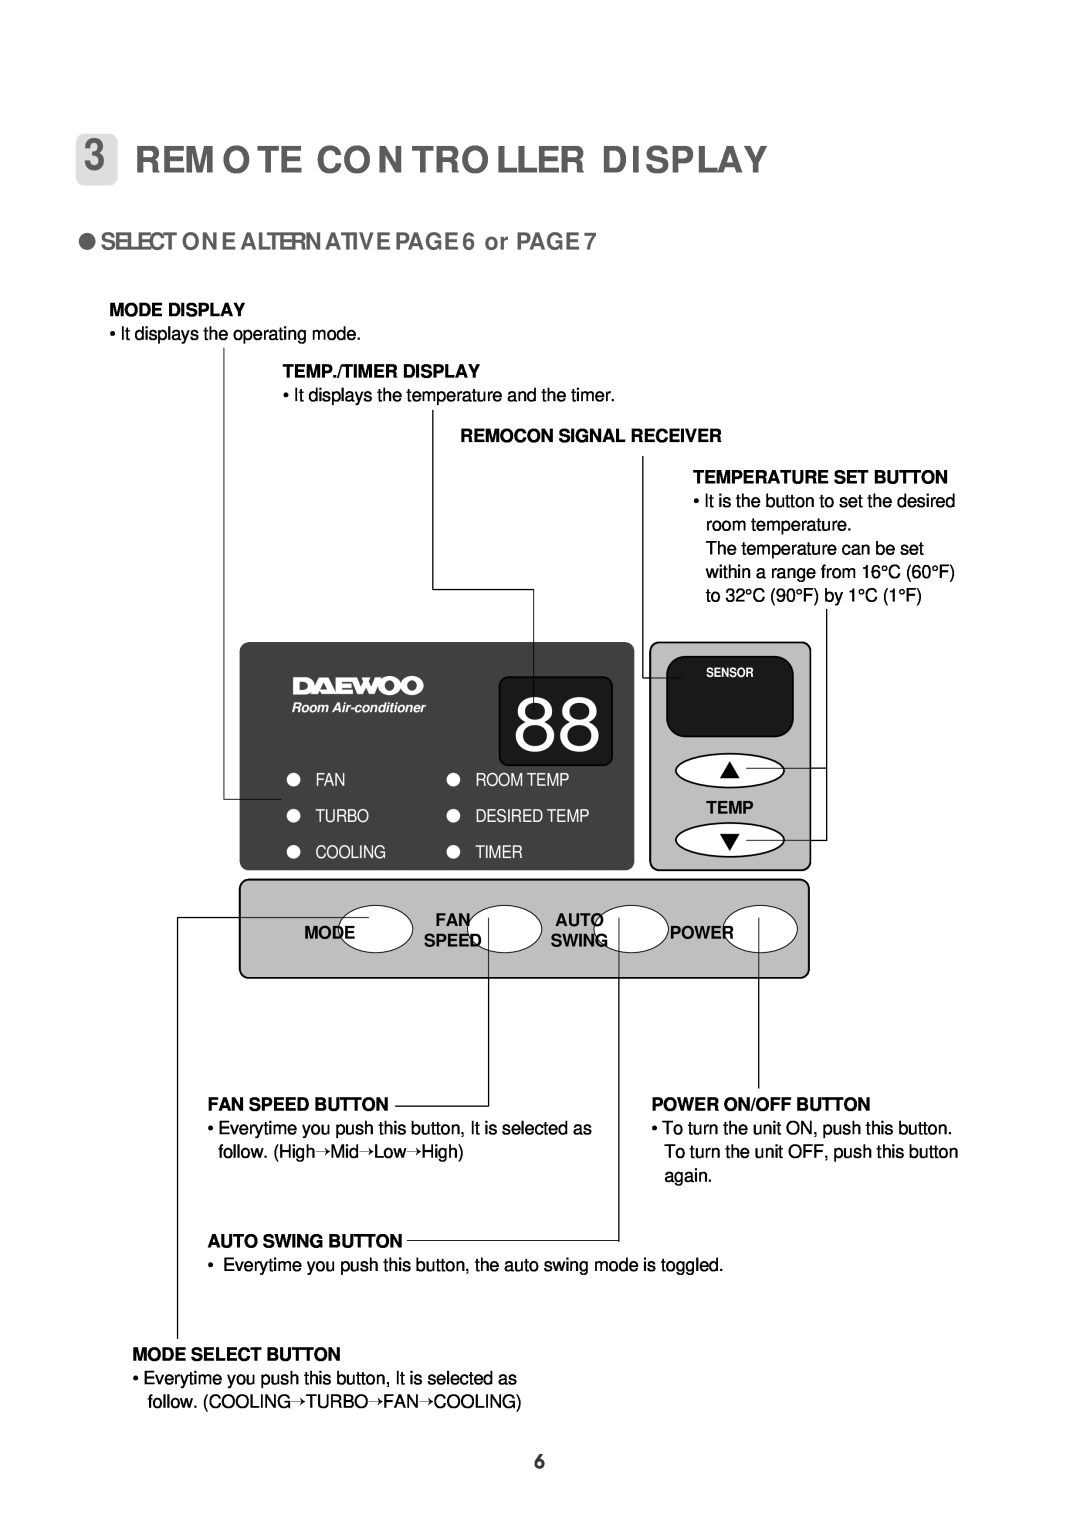 Daewoo DWC-121R 3REMOTE CONTROLLER DISPLAY, SELECT ONE ALTERNATIVE PAGE 6 or PAGE, Mode Display, Temp./Timer Display 